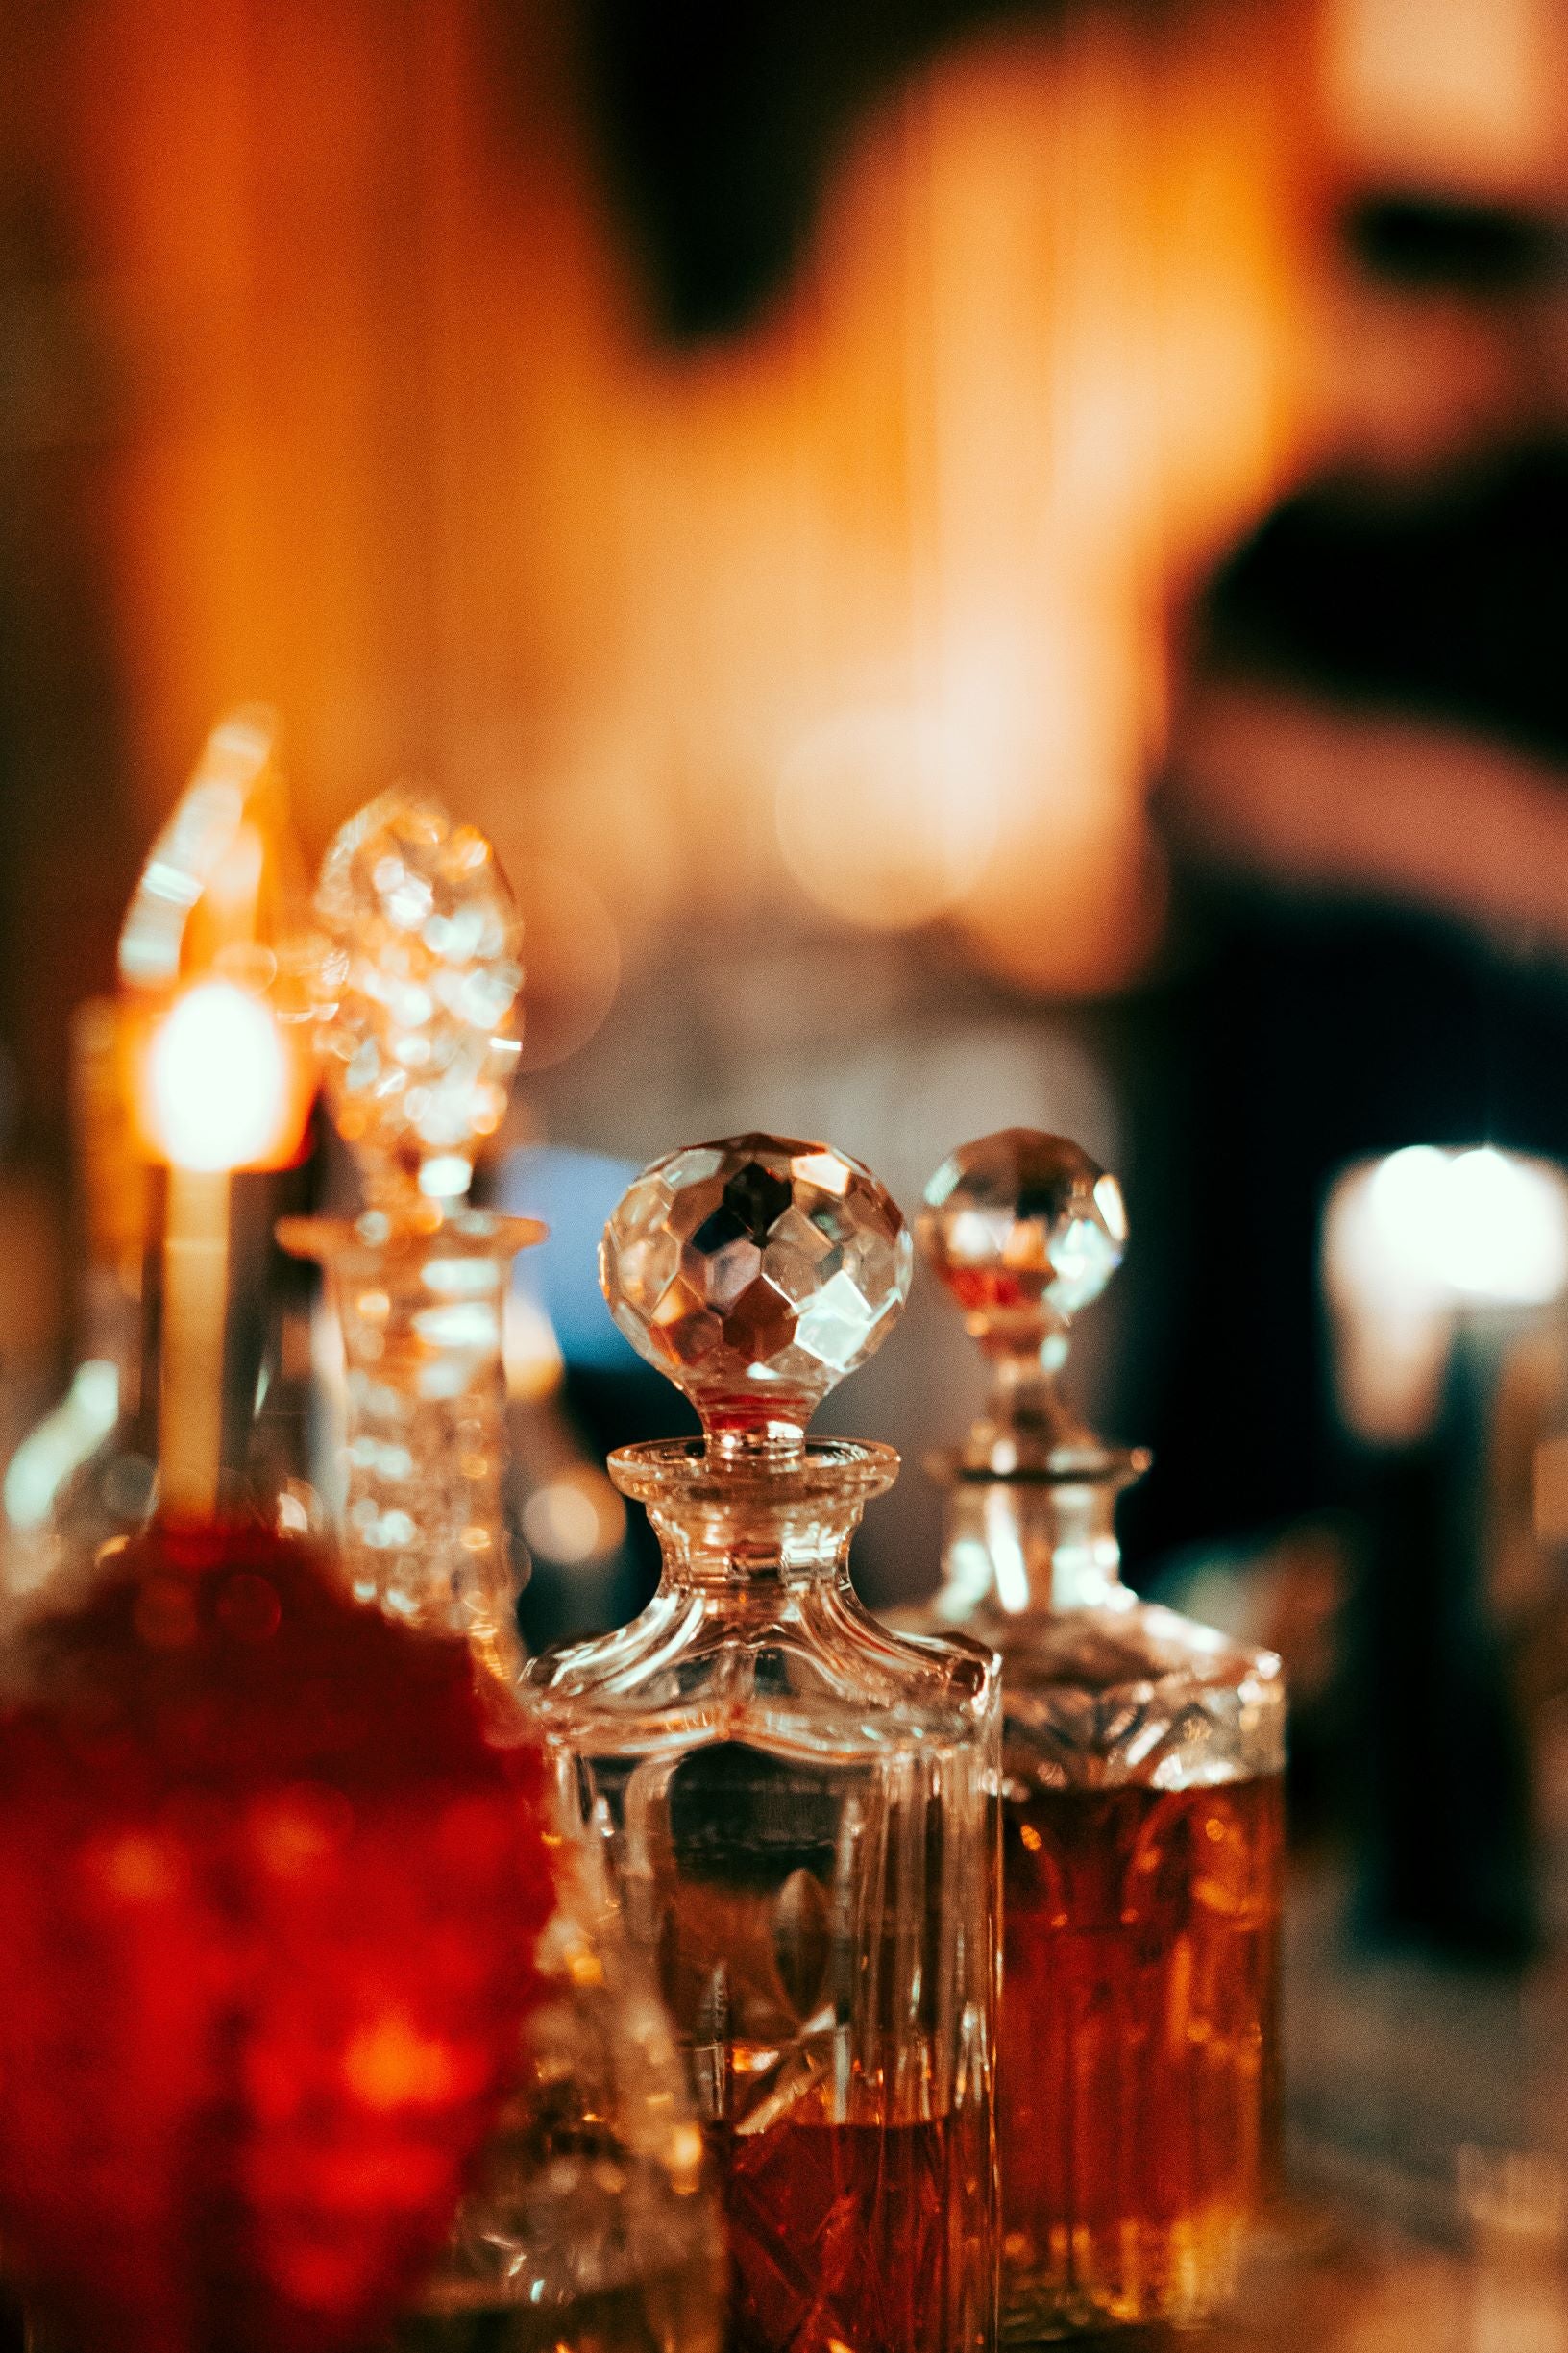 Perfumer's Alcohol for Making Perfume and Room Sprays